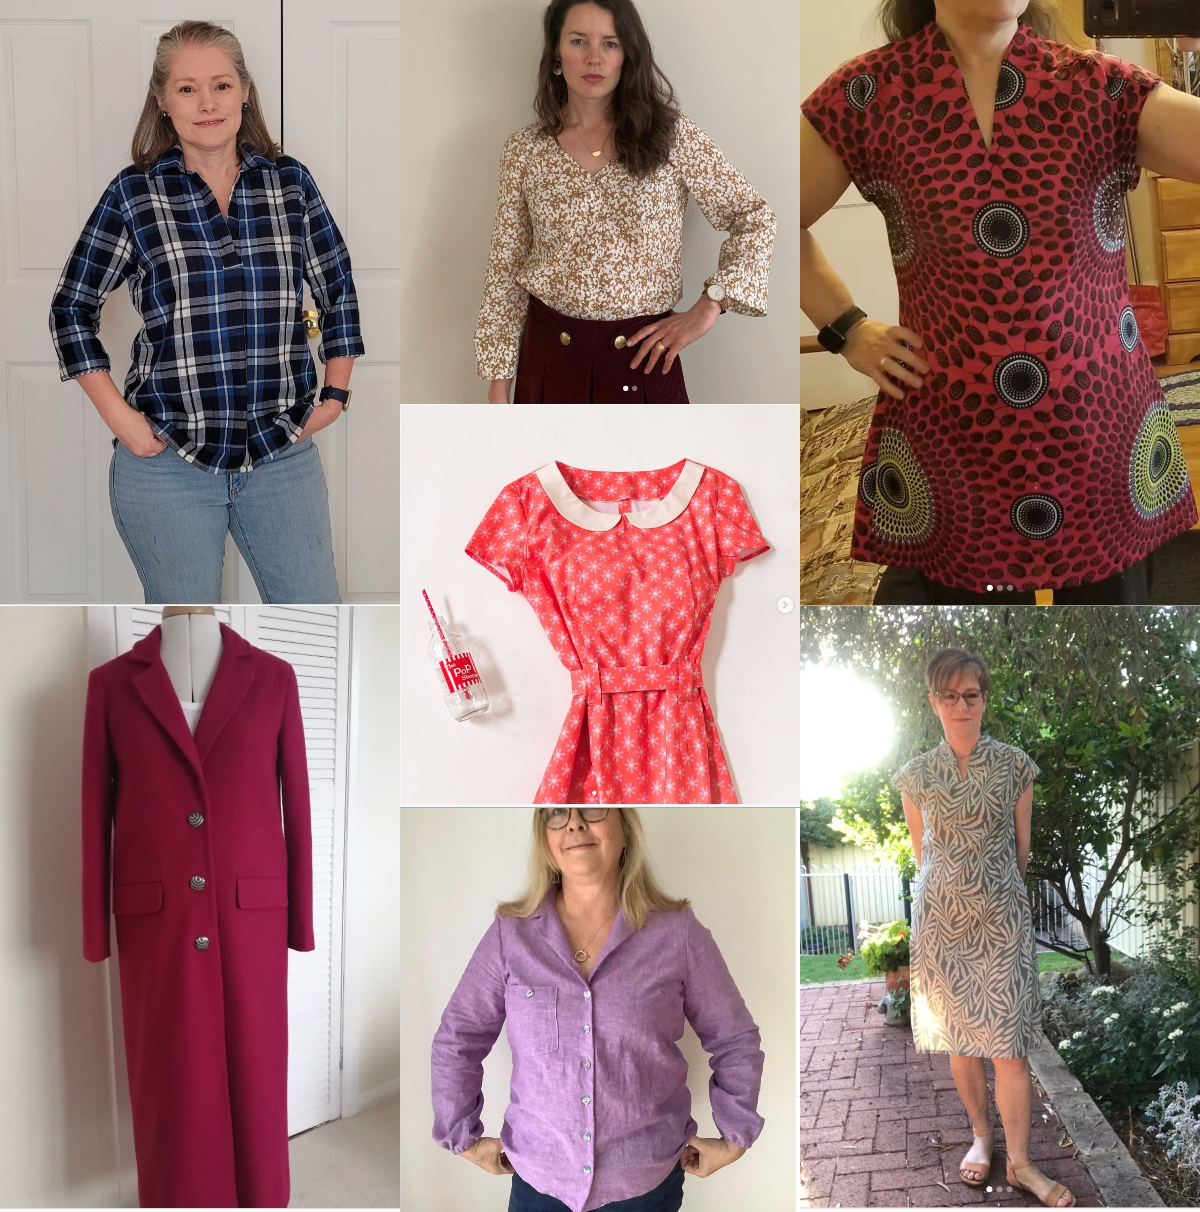 Recent inspiring DIY makes using Oliver + S and Liesl + Co. sewing patterns.